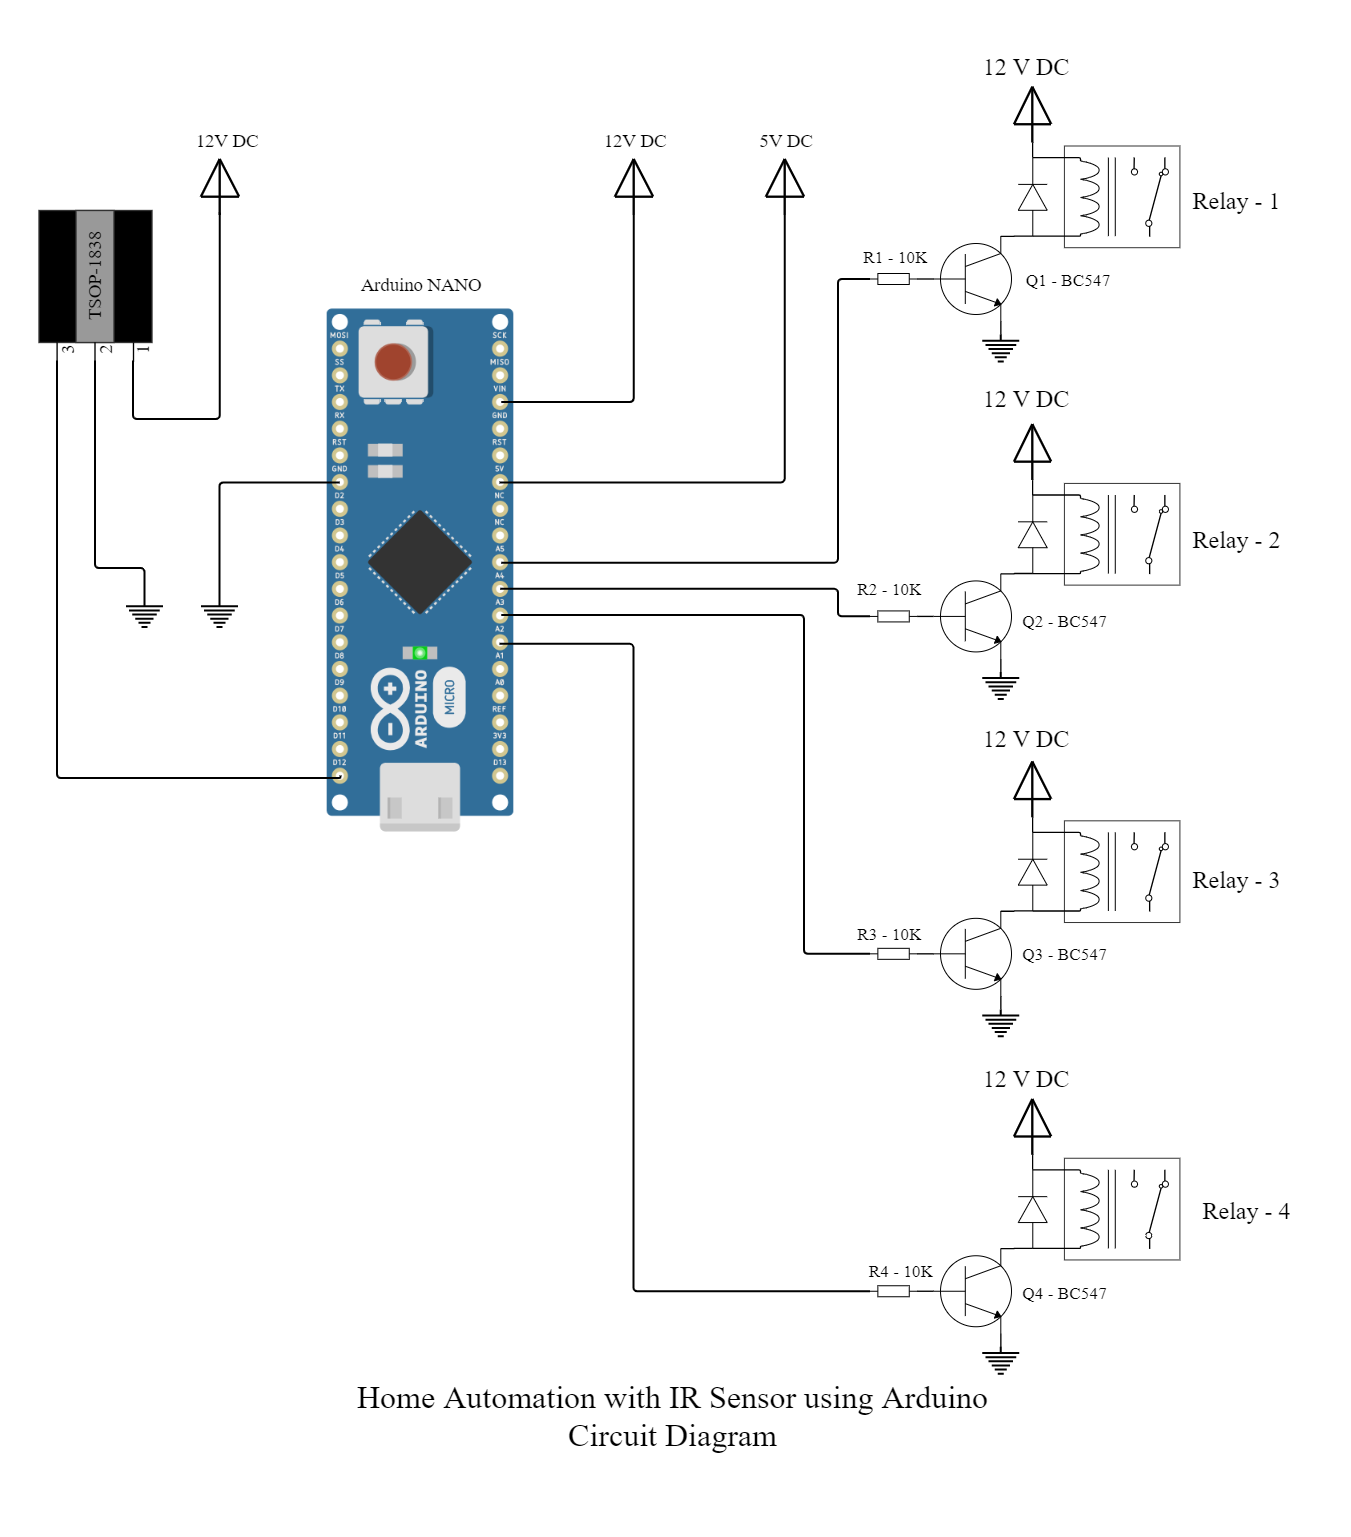 Home Automation Circuit Diagram | EdrawMax Template